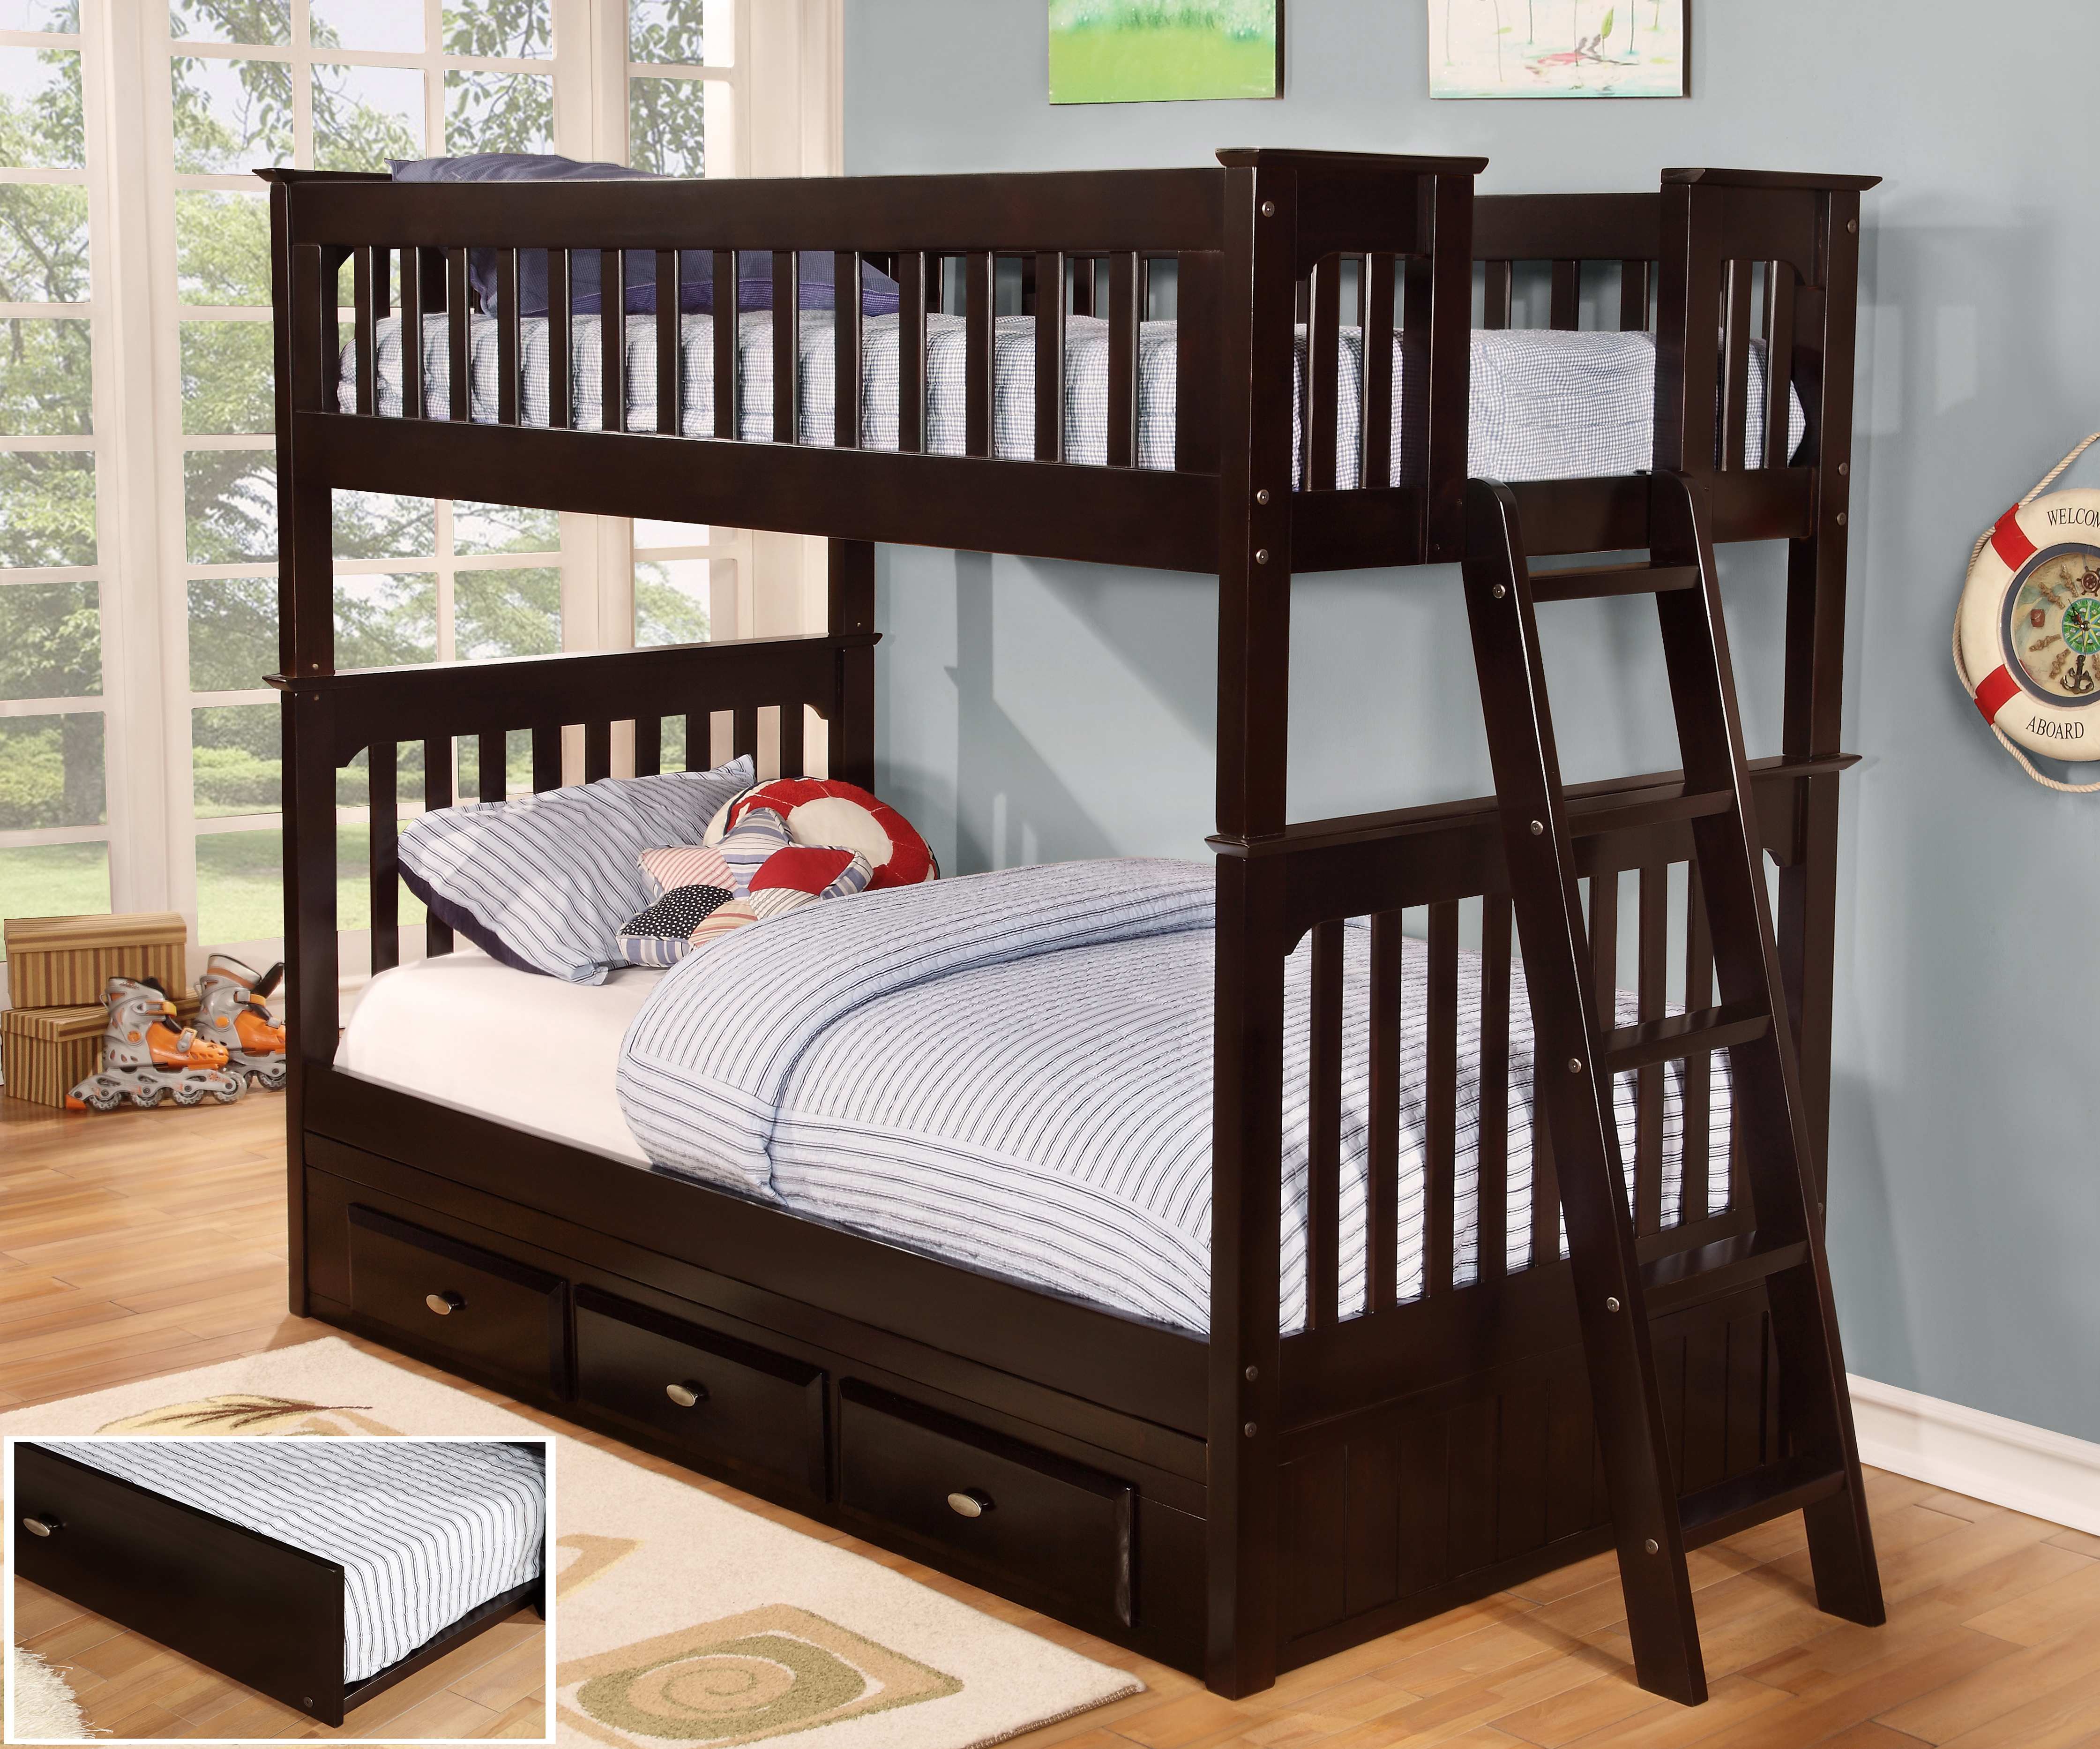 Twin Espresso Bunk Beds Kfs S, Discovery World Furniture Twin Over Twin Bunk Bed